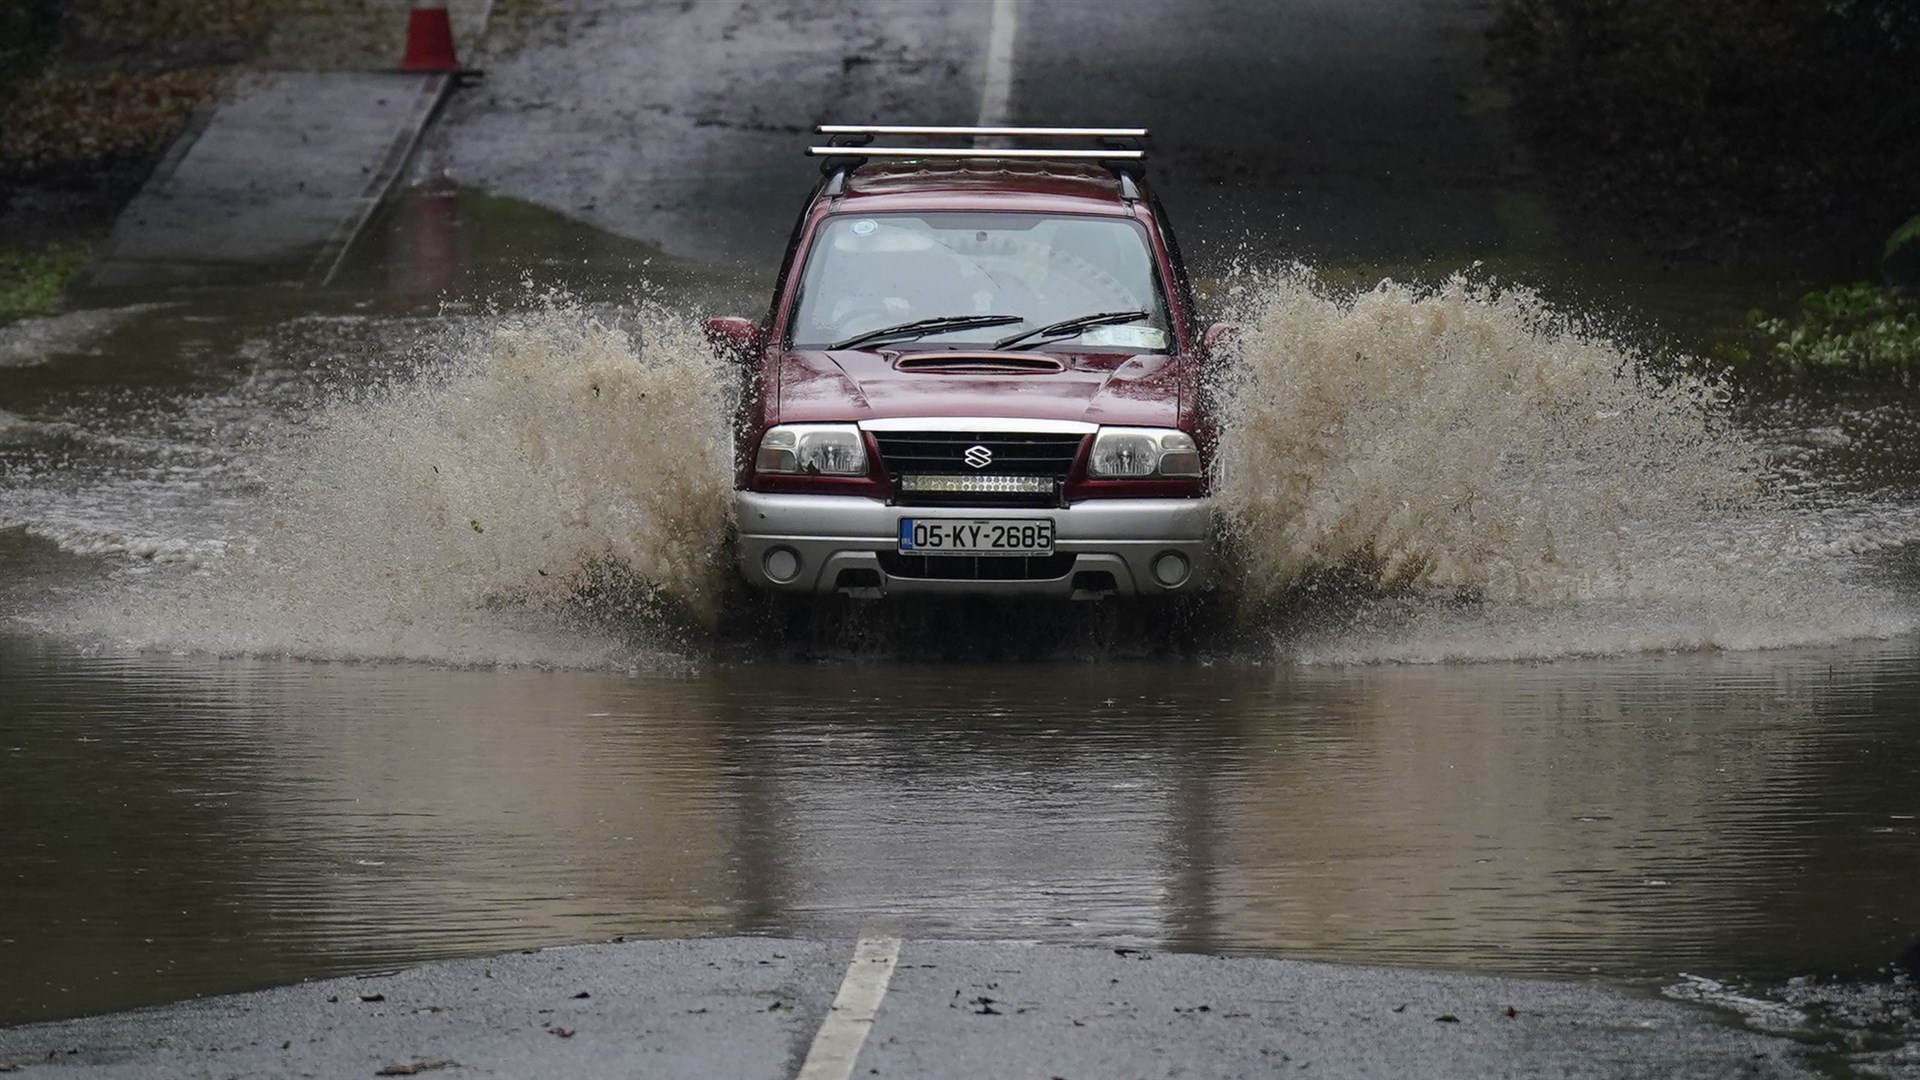 The UK and Ireland has been hit with heavy rainfall in recent days (Niall Carson/PA)